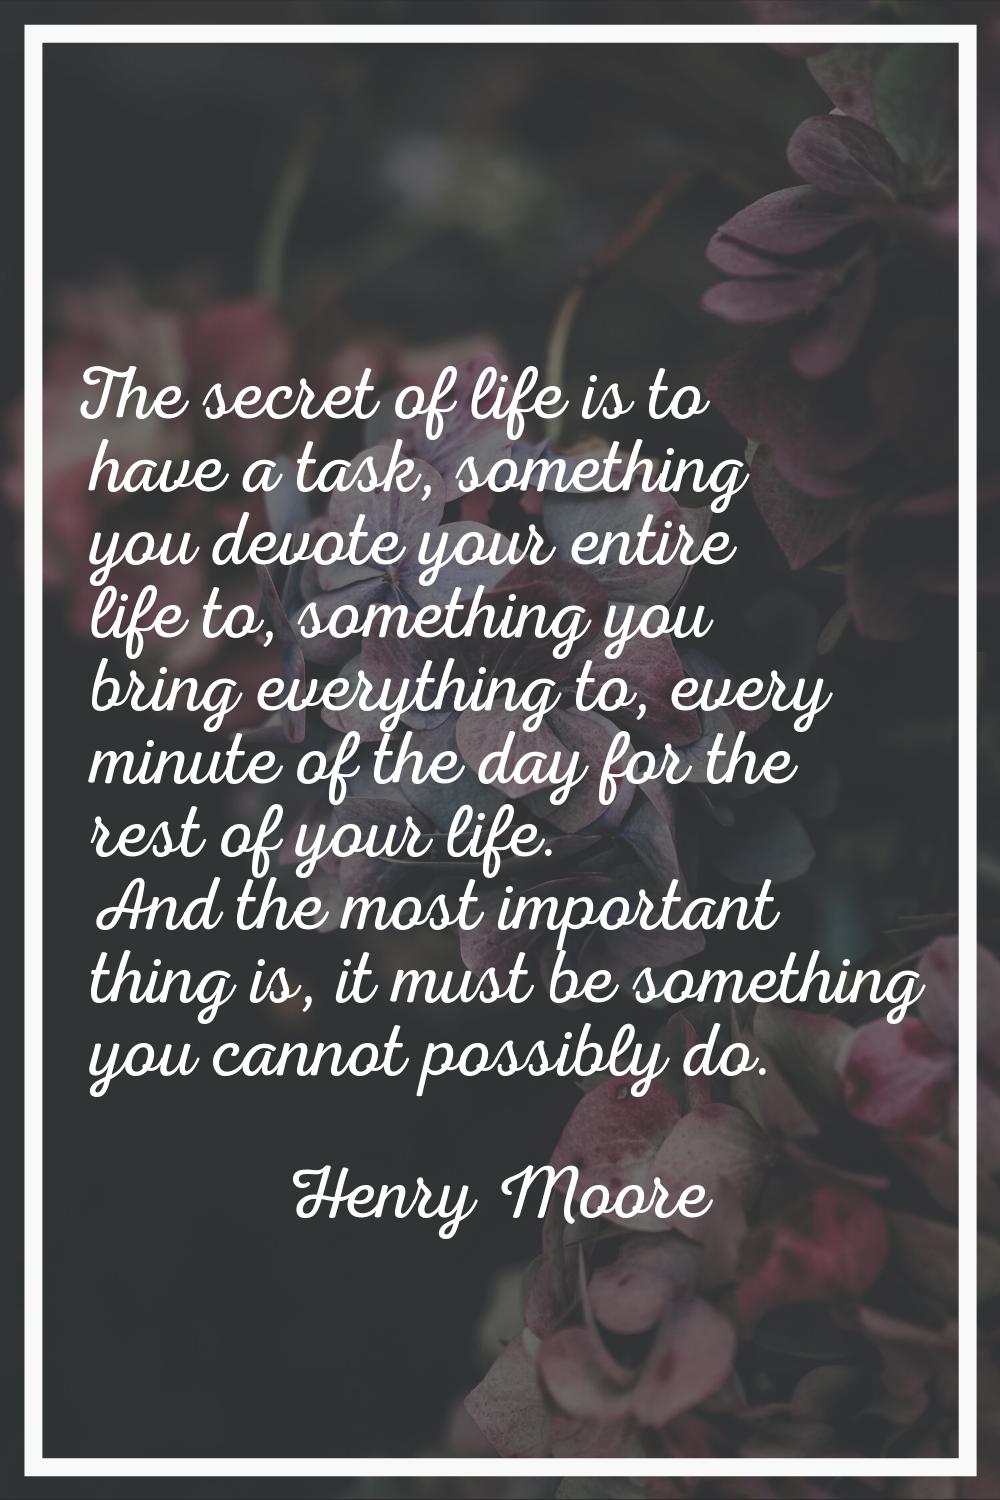 The secret of life is to have a task, something you devote your entire life to, something you bring